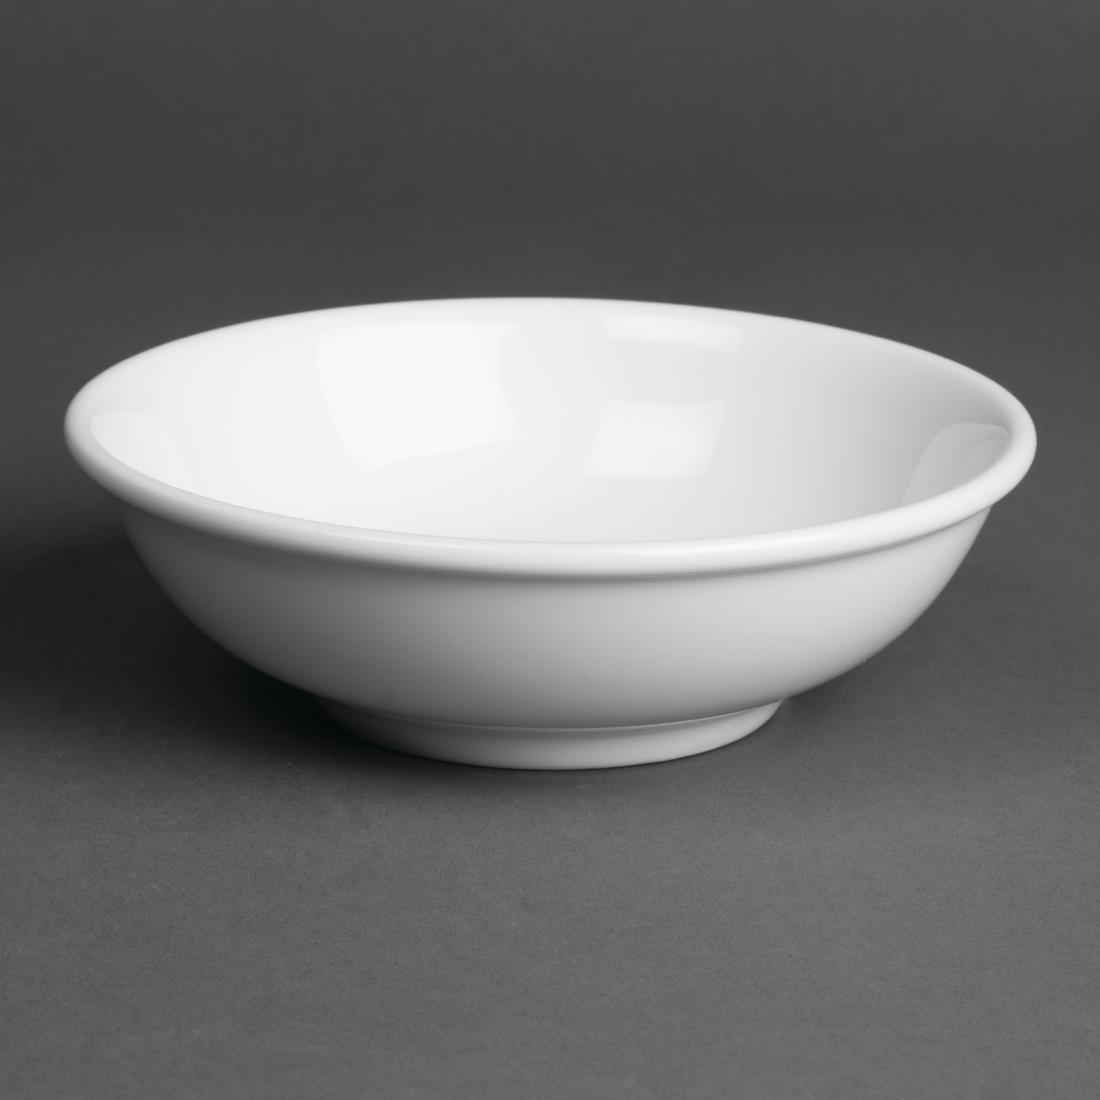 Royal Porcelain Classic White Cereal Bowls 140mm (Pack of 12) - CG055  - 1